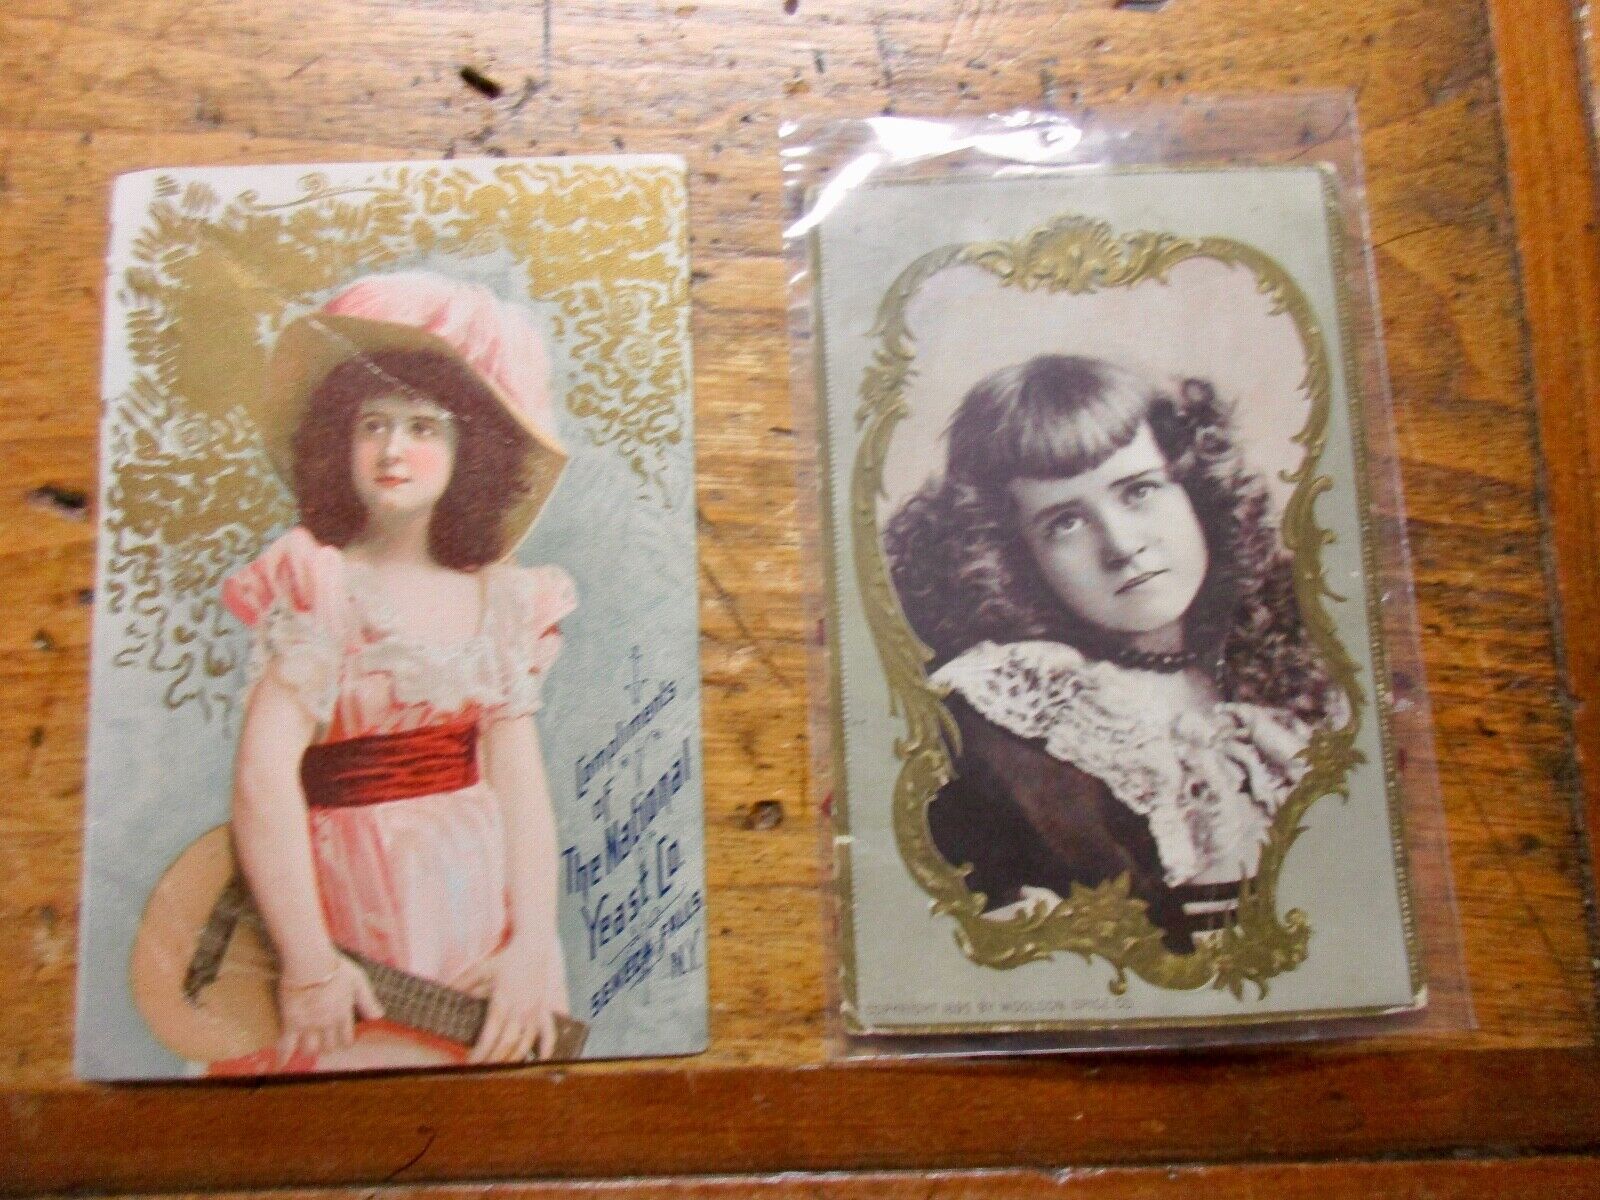  2 1895 VICTORIAN TRADE CARDS SMALL GIRLS NATIONAL YEAST WOOLSON SPICE 